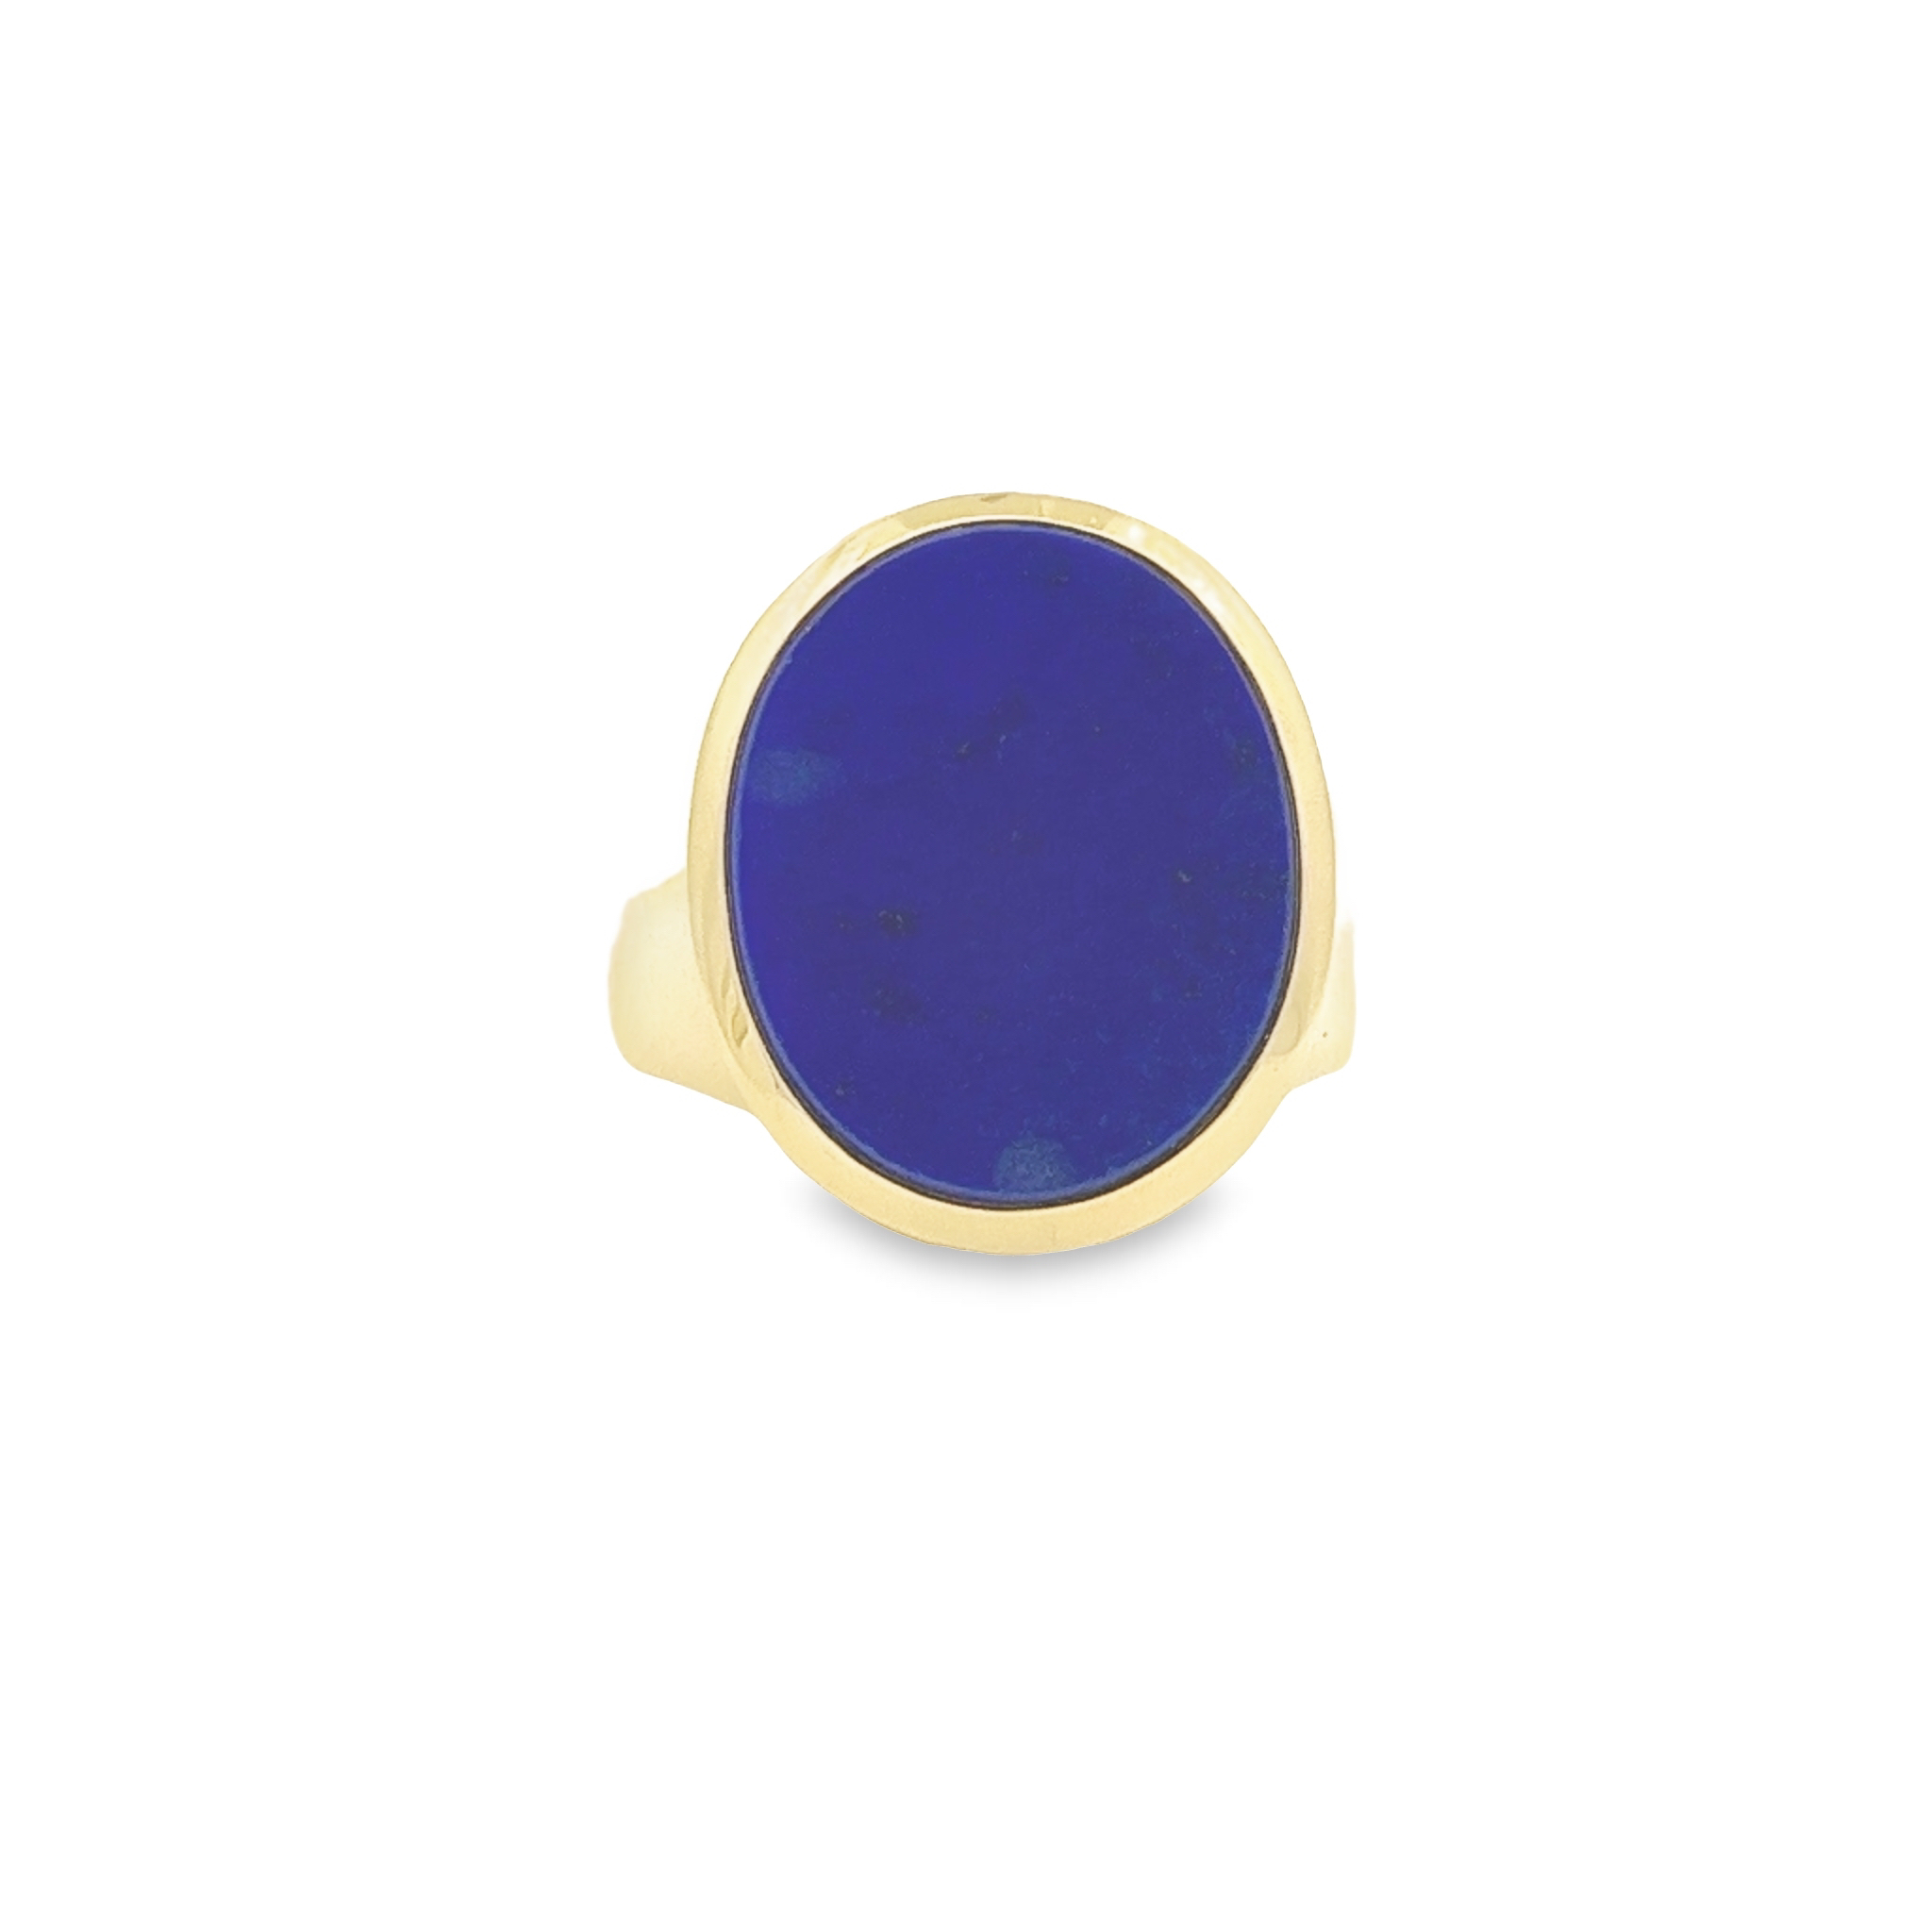 12gm 14ct Gold Gents Signet Ring with Oval Lapis Lazuli – Pre-Owned